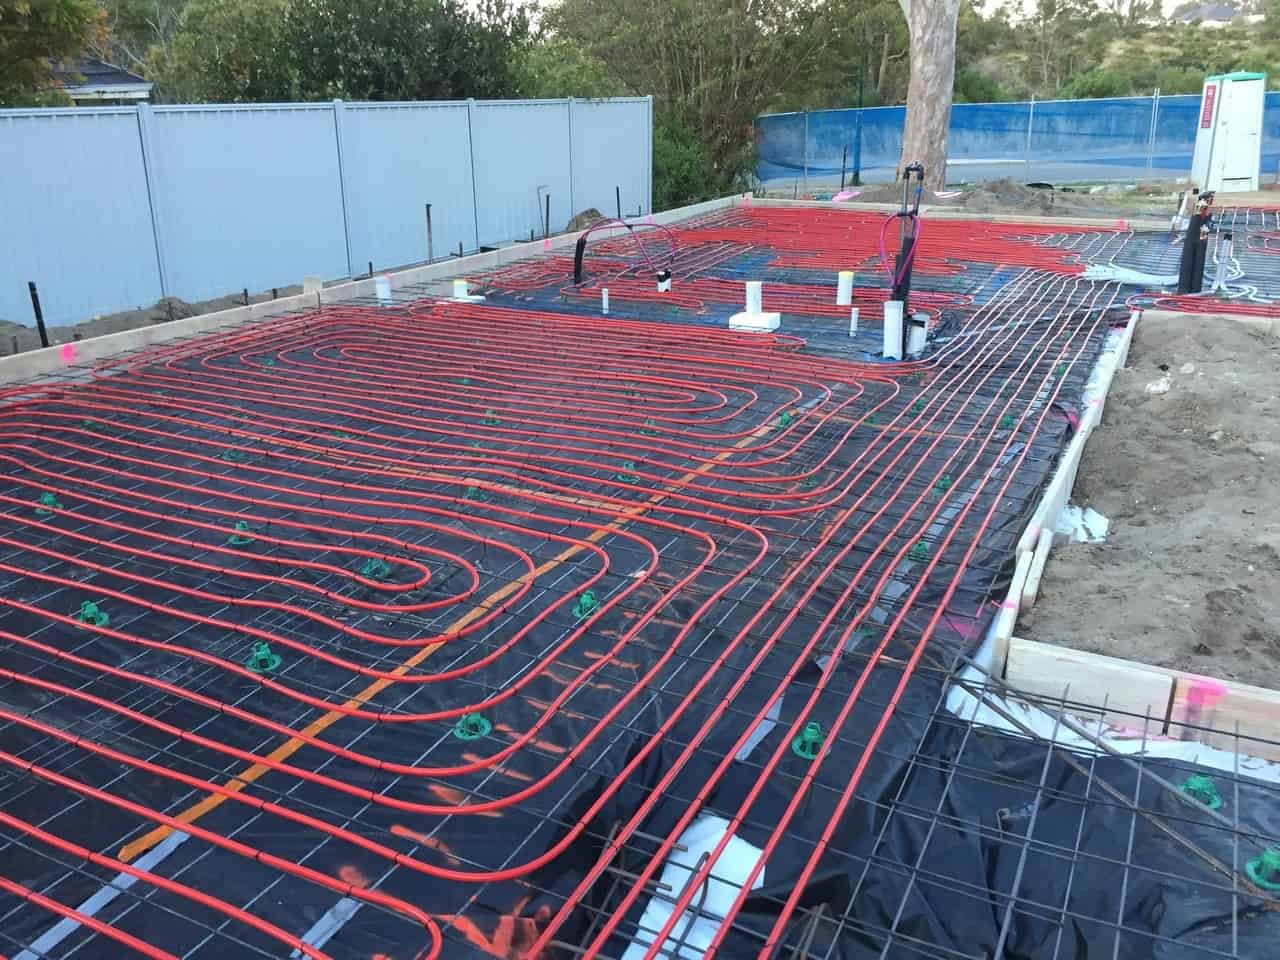 Floor heating: Should I heat my whole house, or only parts?